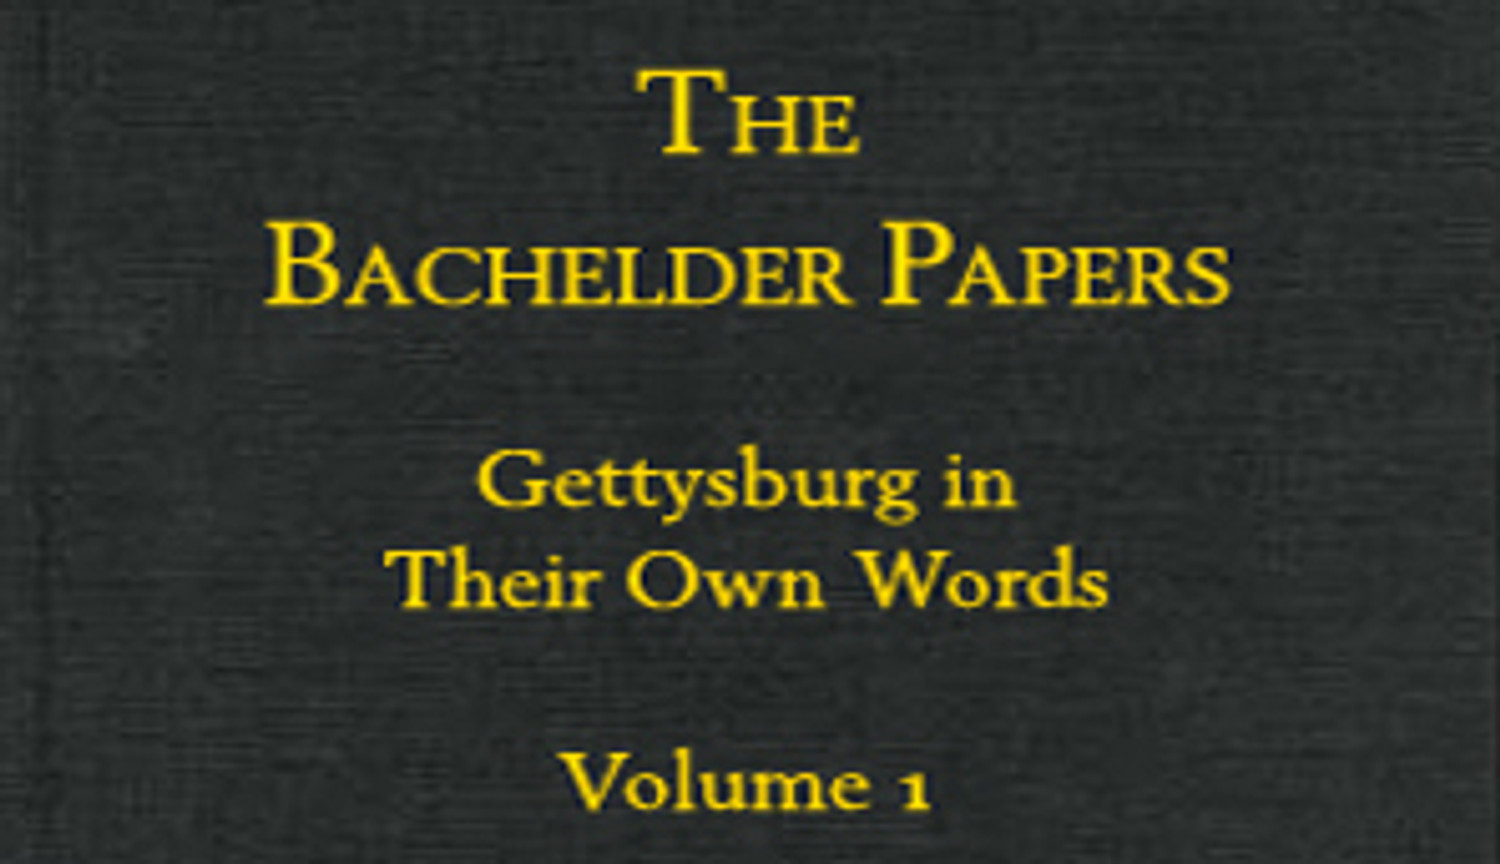 ALERT:  Limited edition Bachelder Papers to be Reprinted!